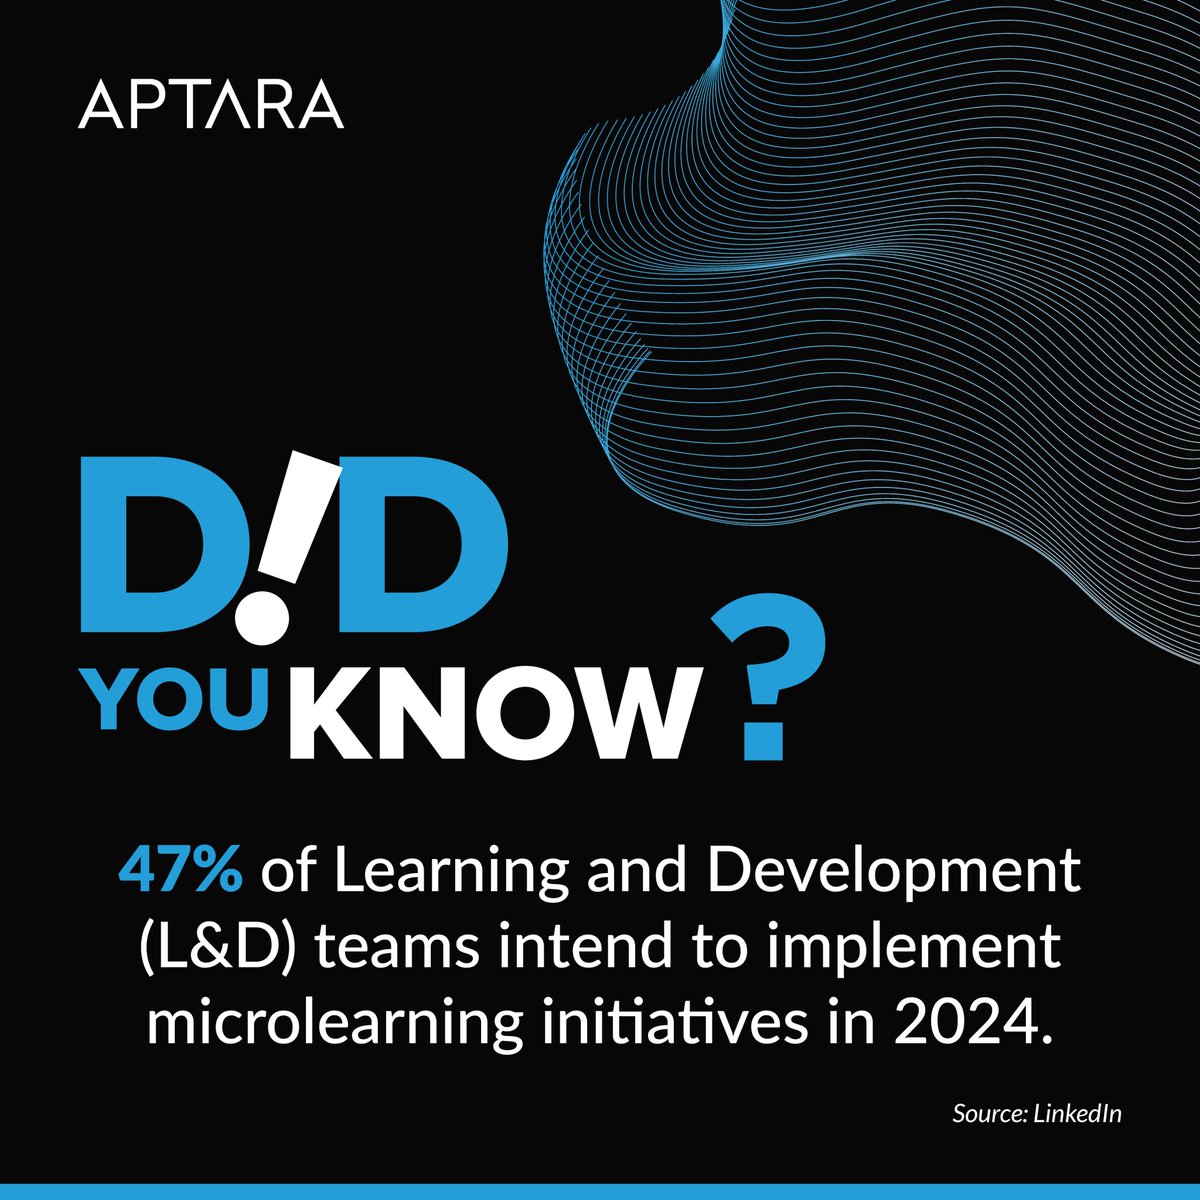 Microlearning is the go-to strategy for Learning and Development teams in 2024.  Stay ahead of the curve with this innovative approach!

#Aptara #Microlearning #eLearning #Training #ProfessionalDevelopment #FutureOfWork #SkillsDevelopment #ContinuousLearning #WorkplaceLearning